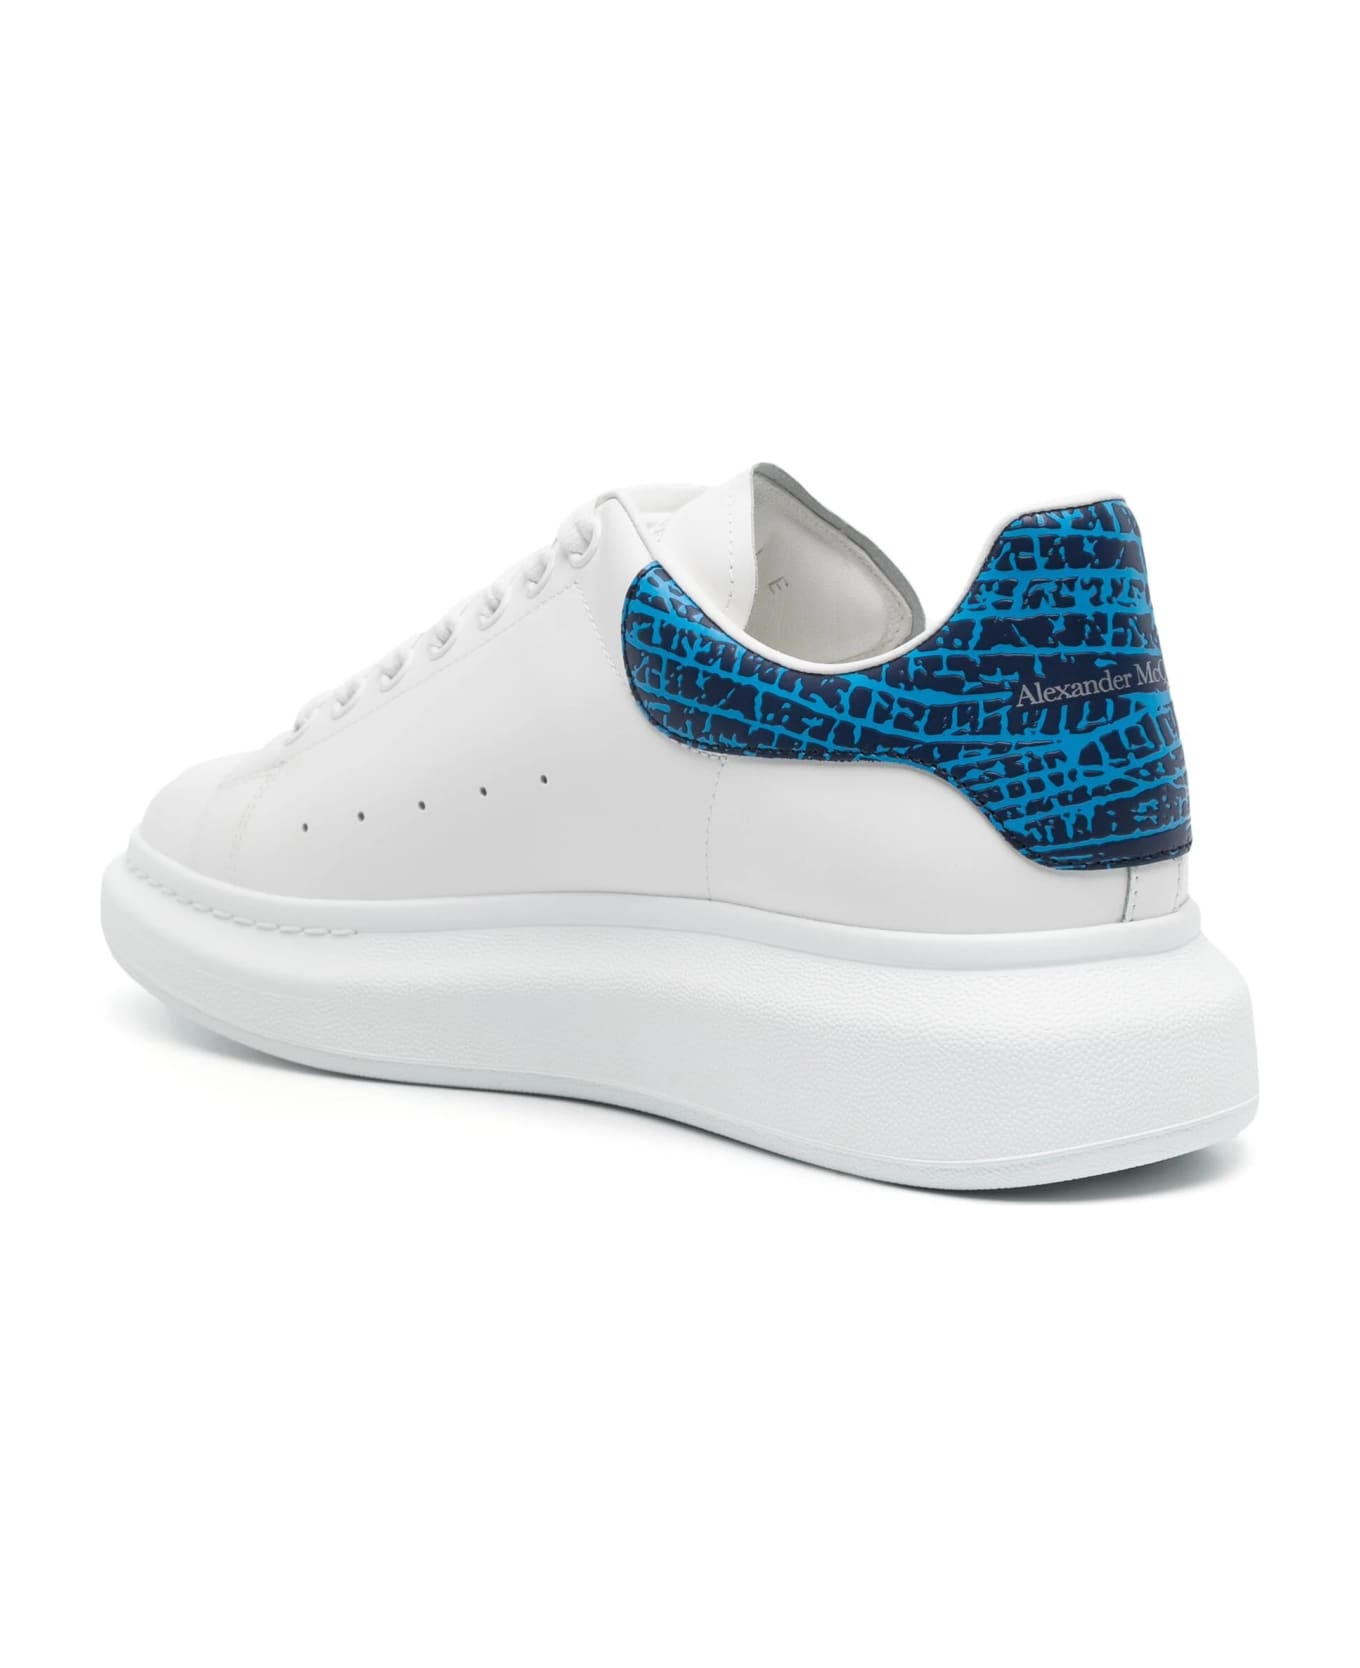 Alexander McQueen Lapis Lazuli Blue And White Oversized Sneakers - White